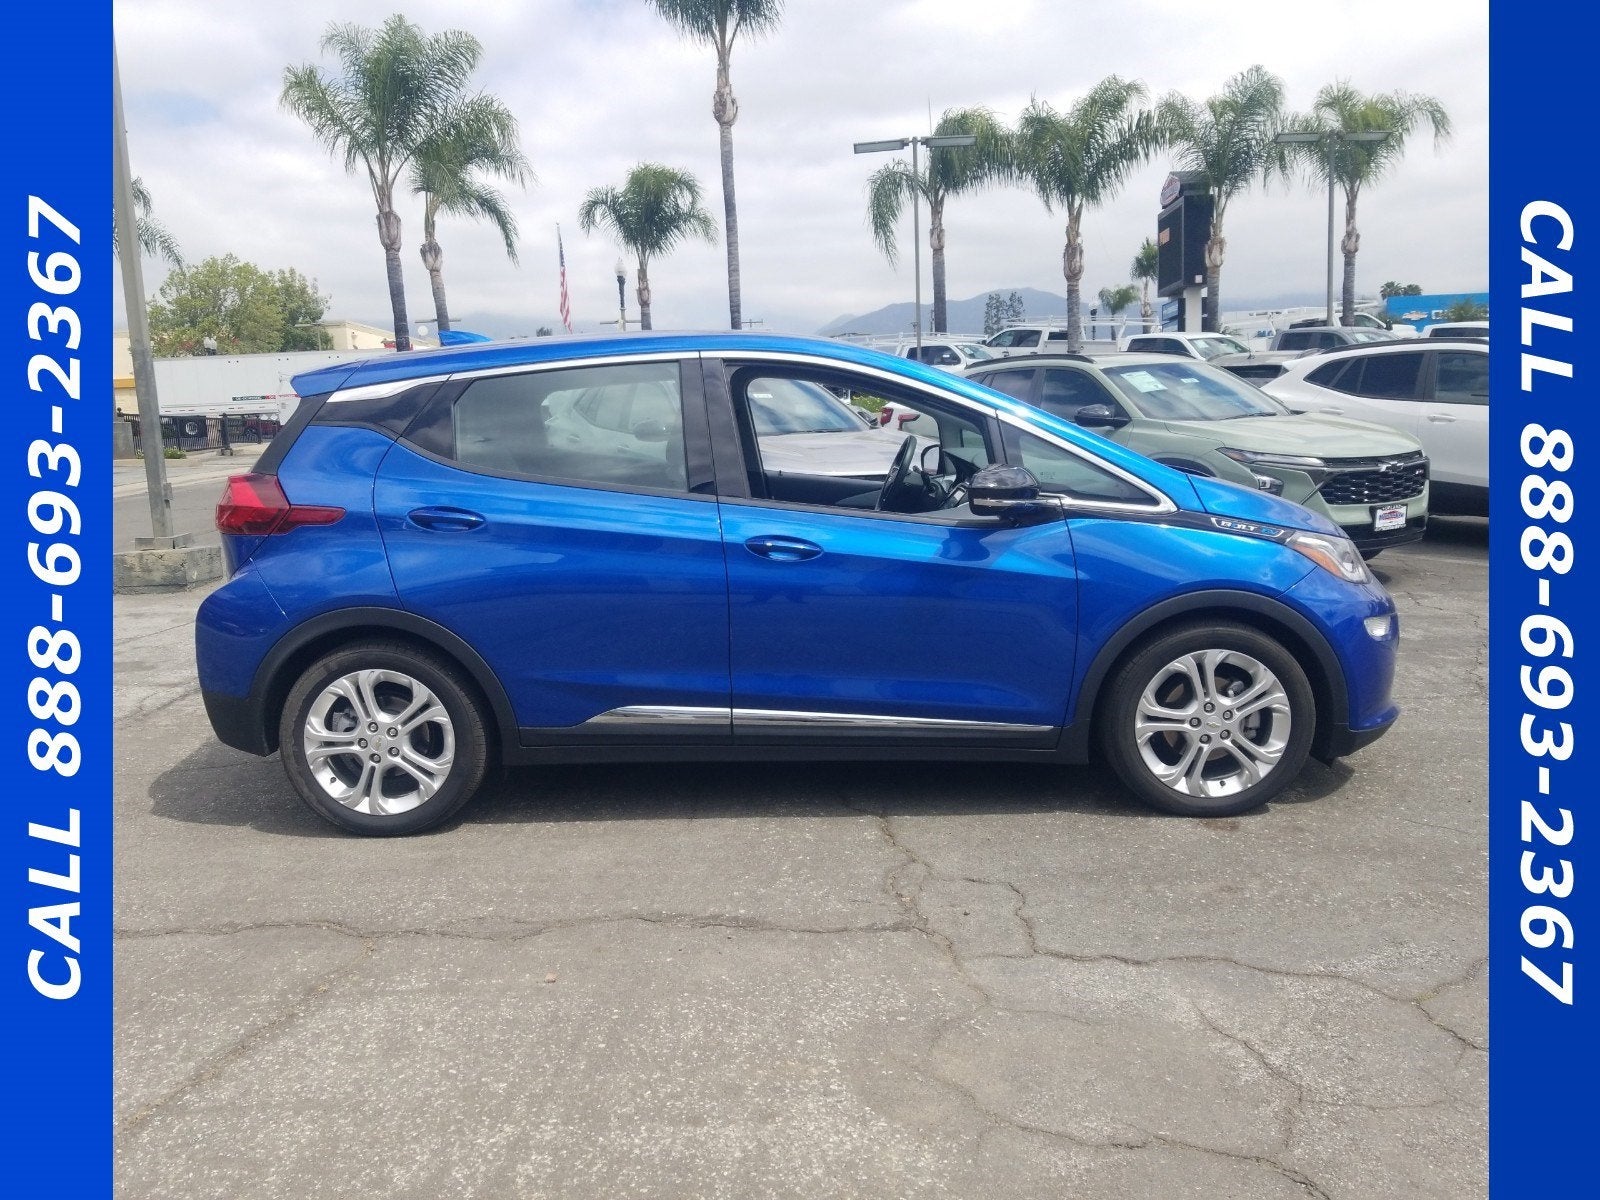 Used 2021 Chevrolet Bolt EV LT with VIN 1G1FY6S09M4109437 for sale in Upland, CA